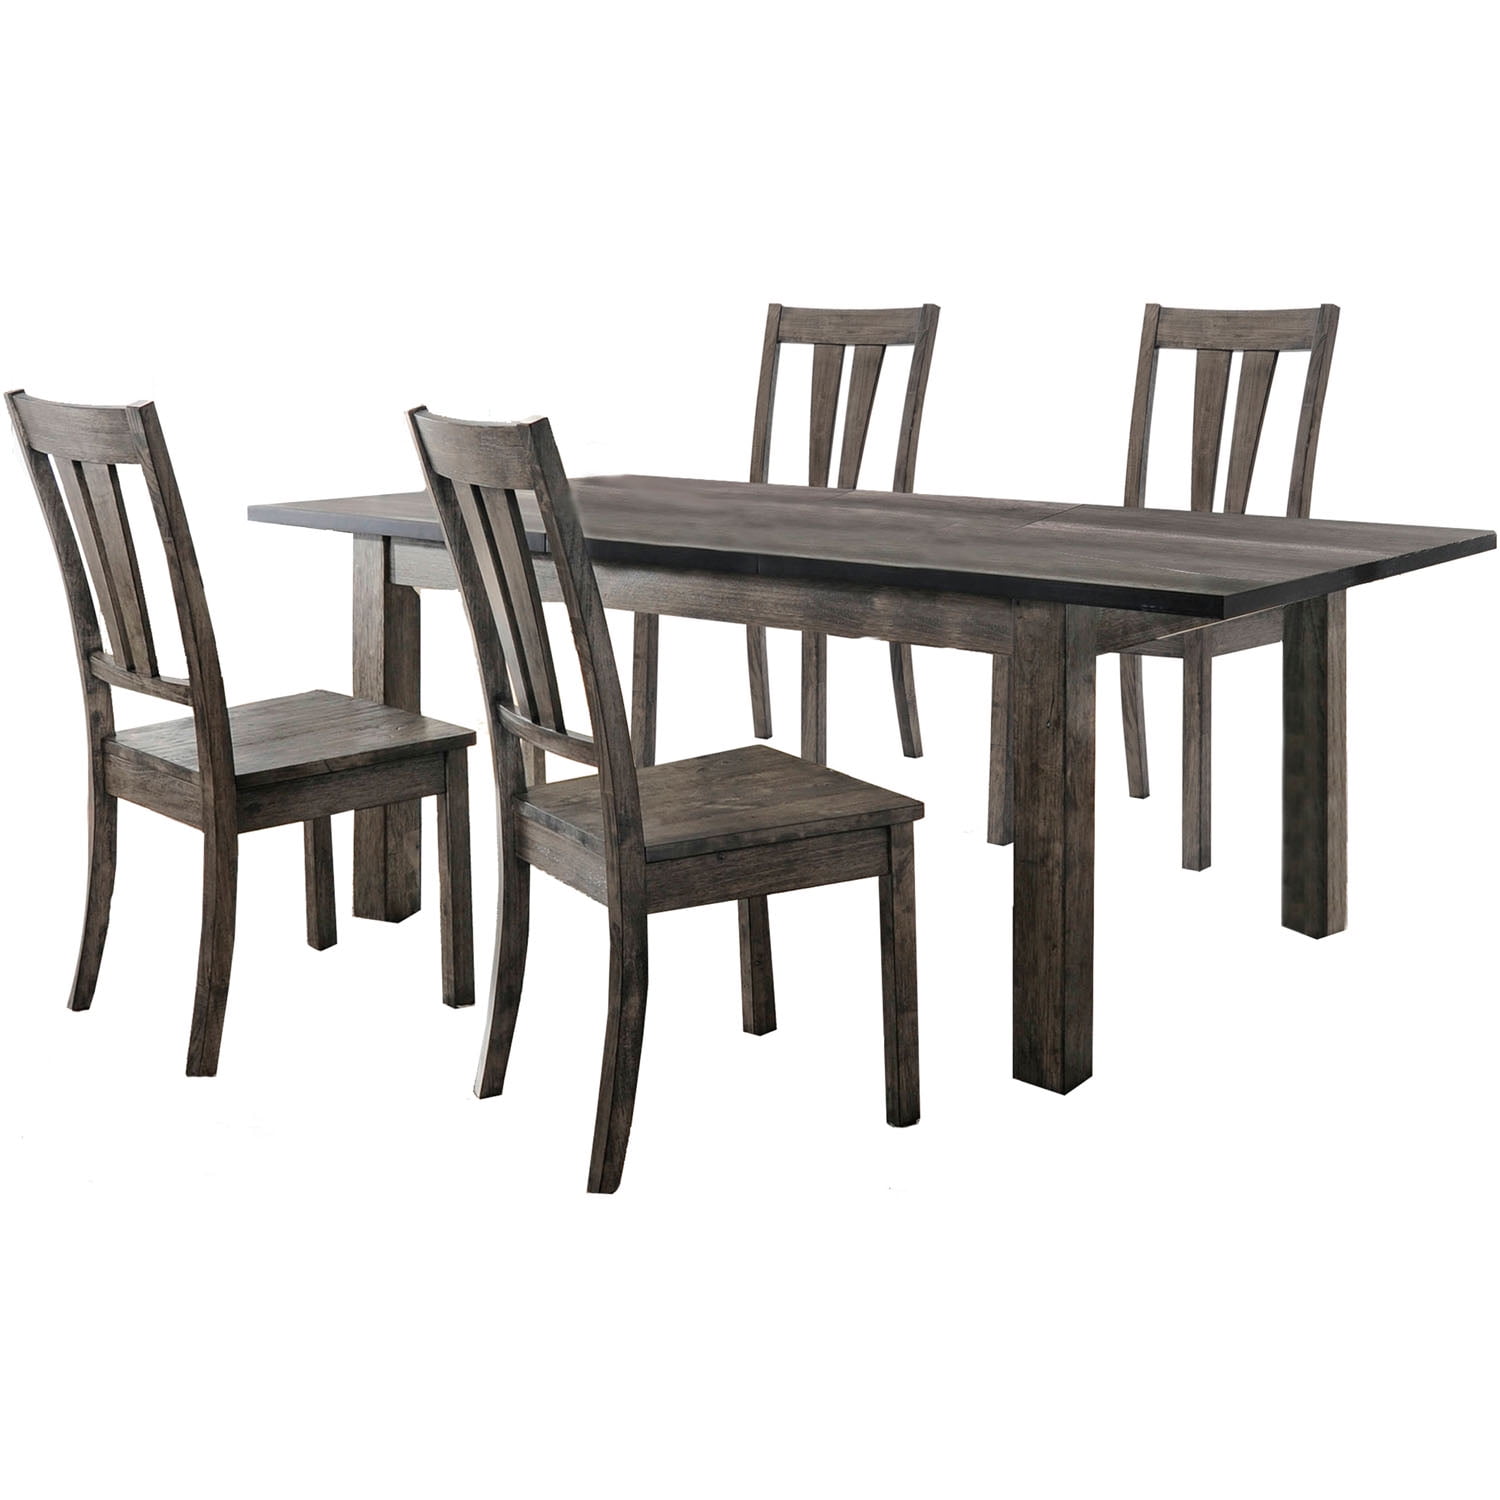 99001-wd5pc1-wg 30 X 78 X 42 In. Drexel Dining Table With 4 Wood Side Chairs, 5 Piece